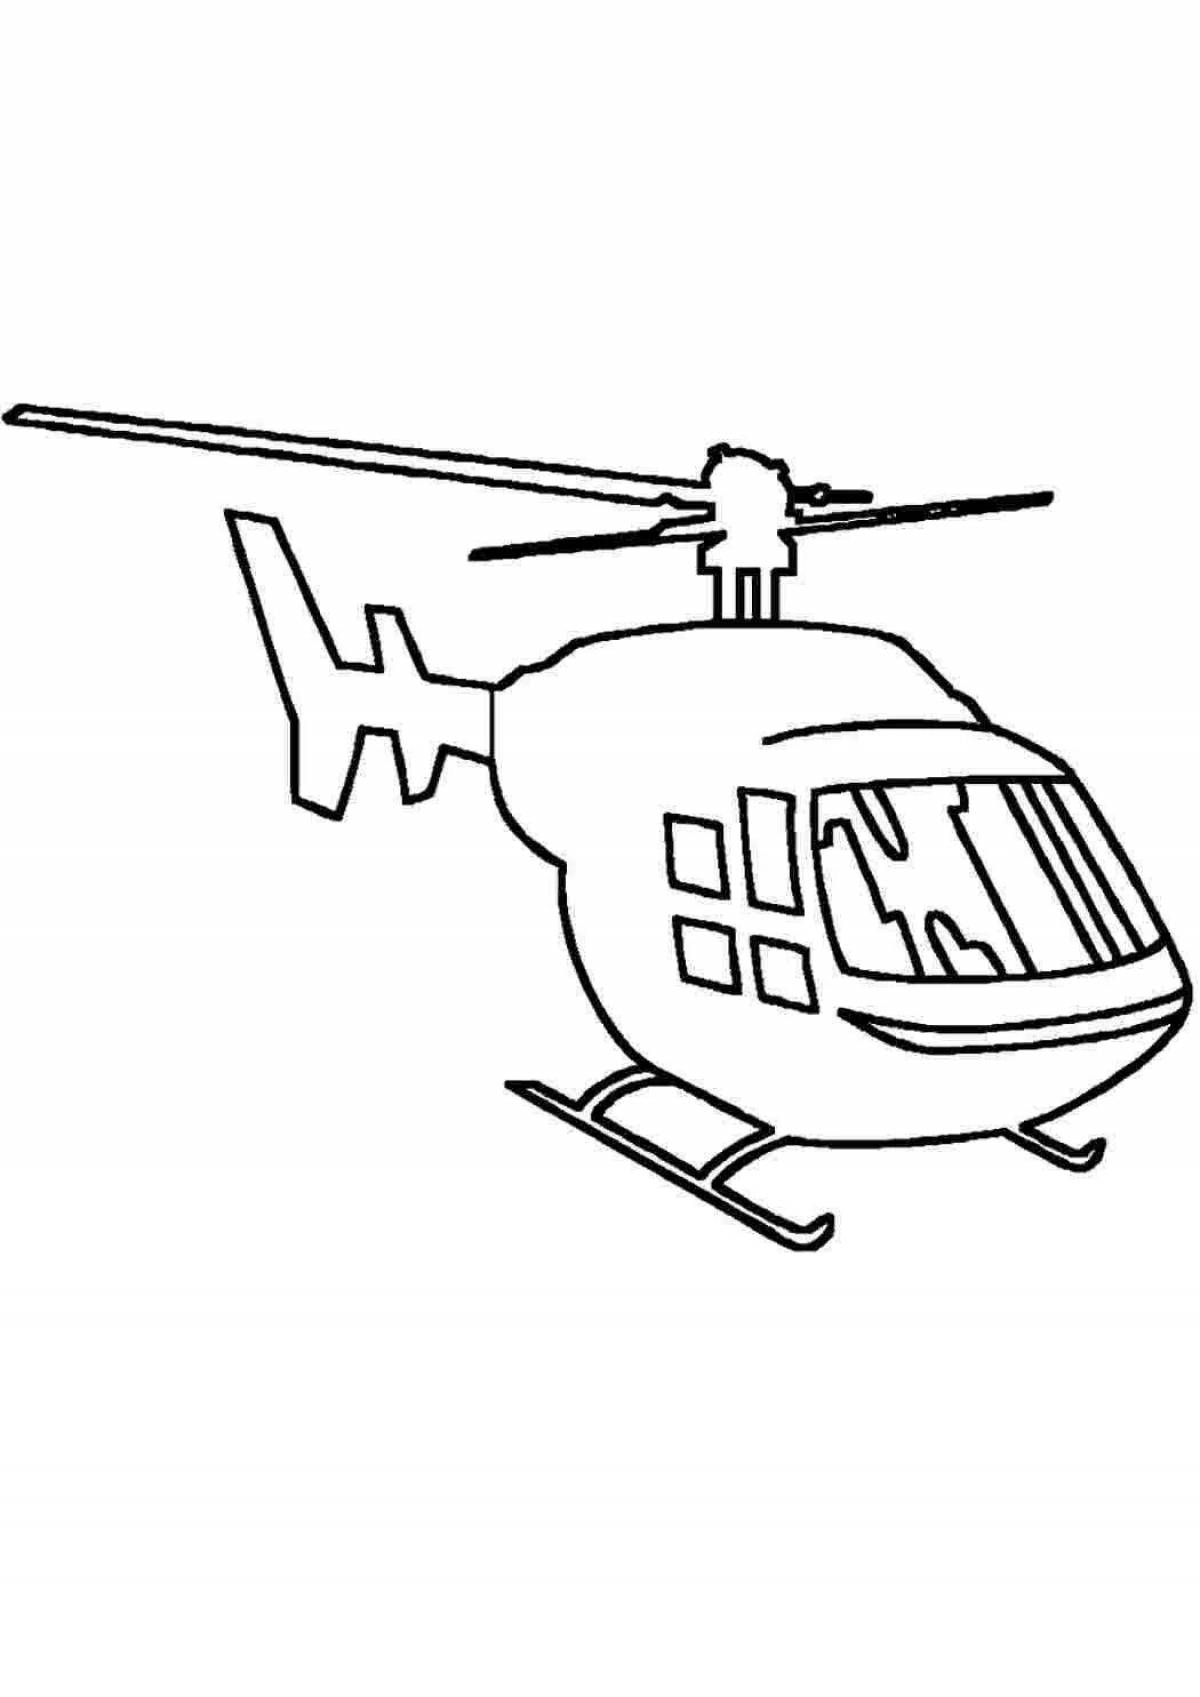 Attractive police helicopter coloring book for kids